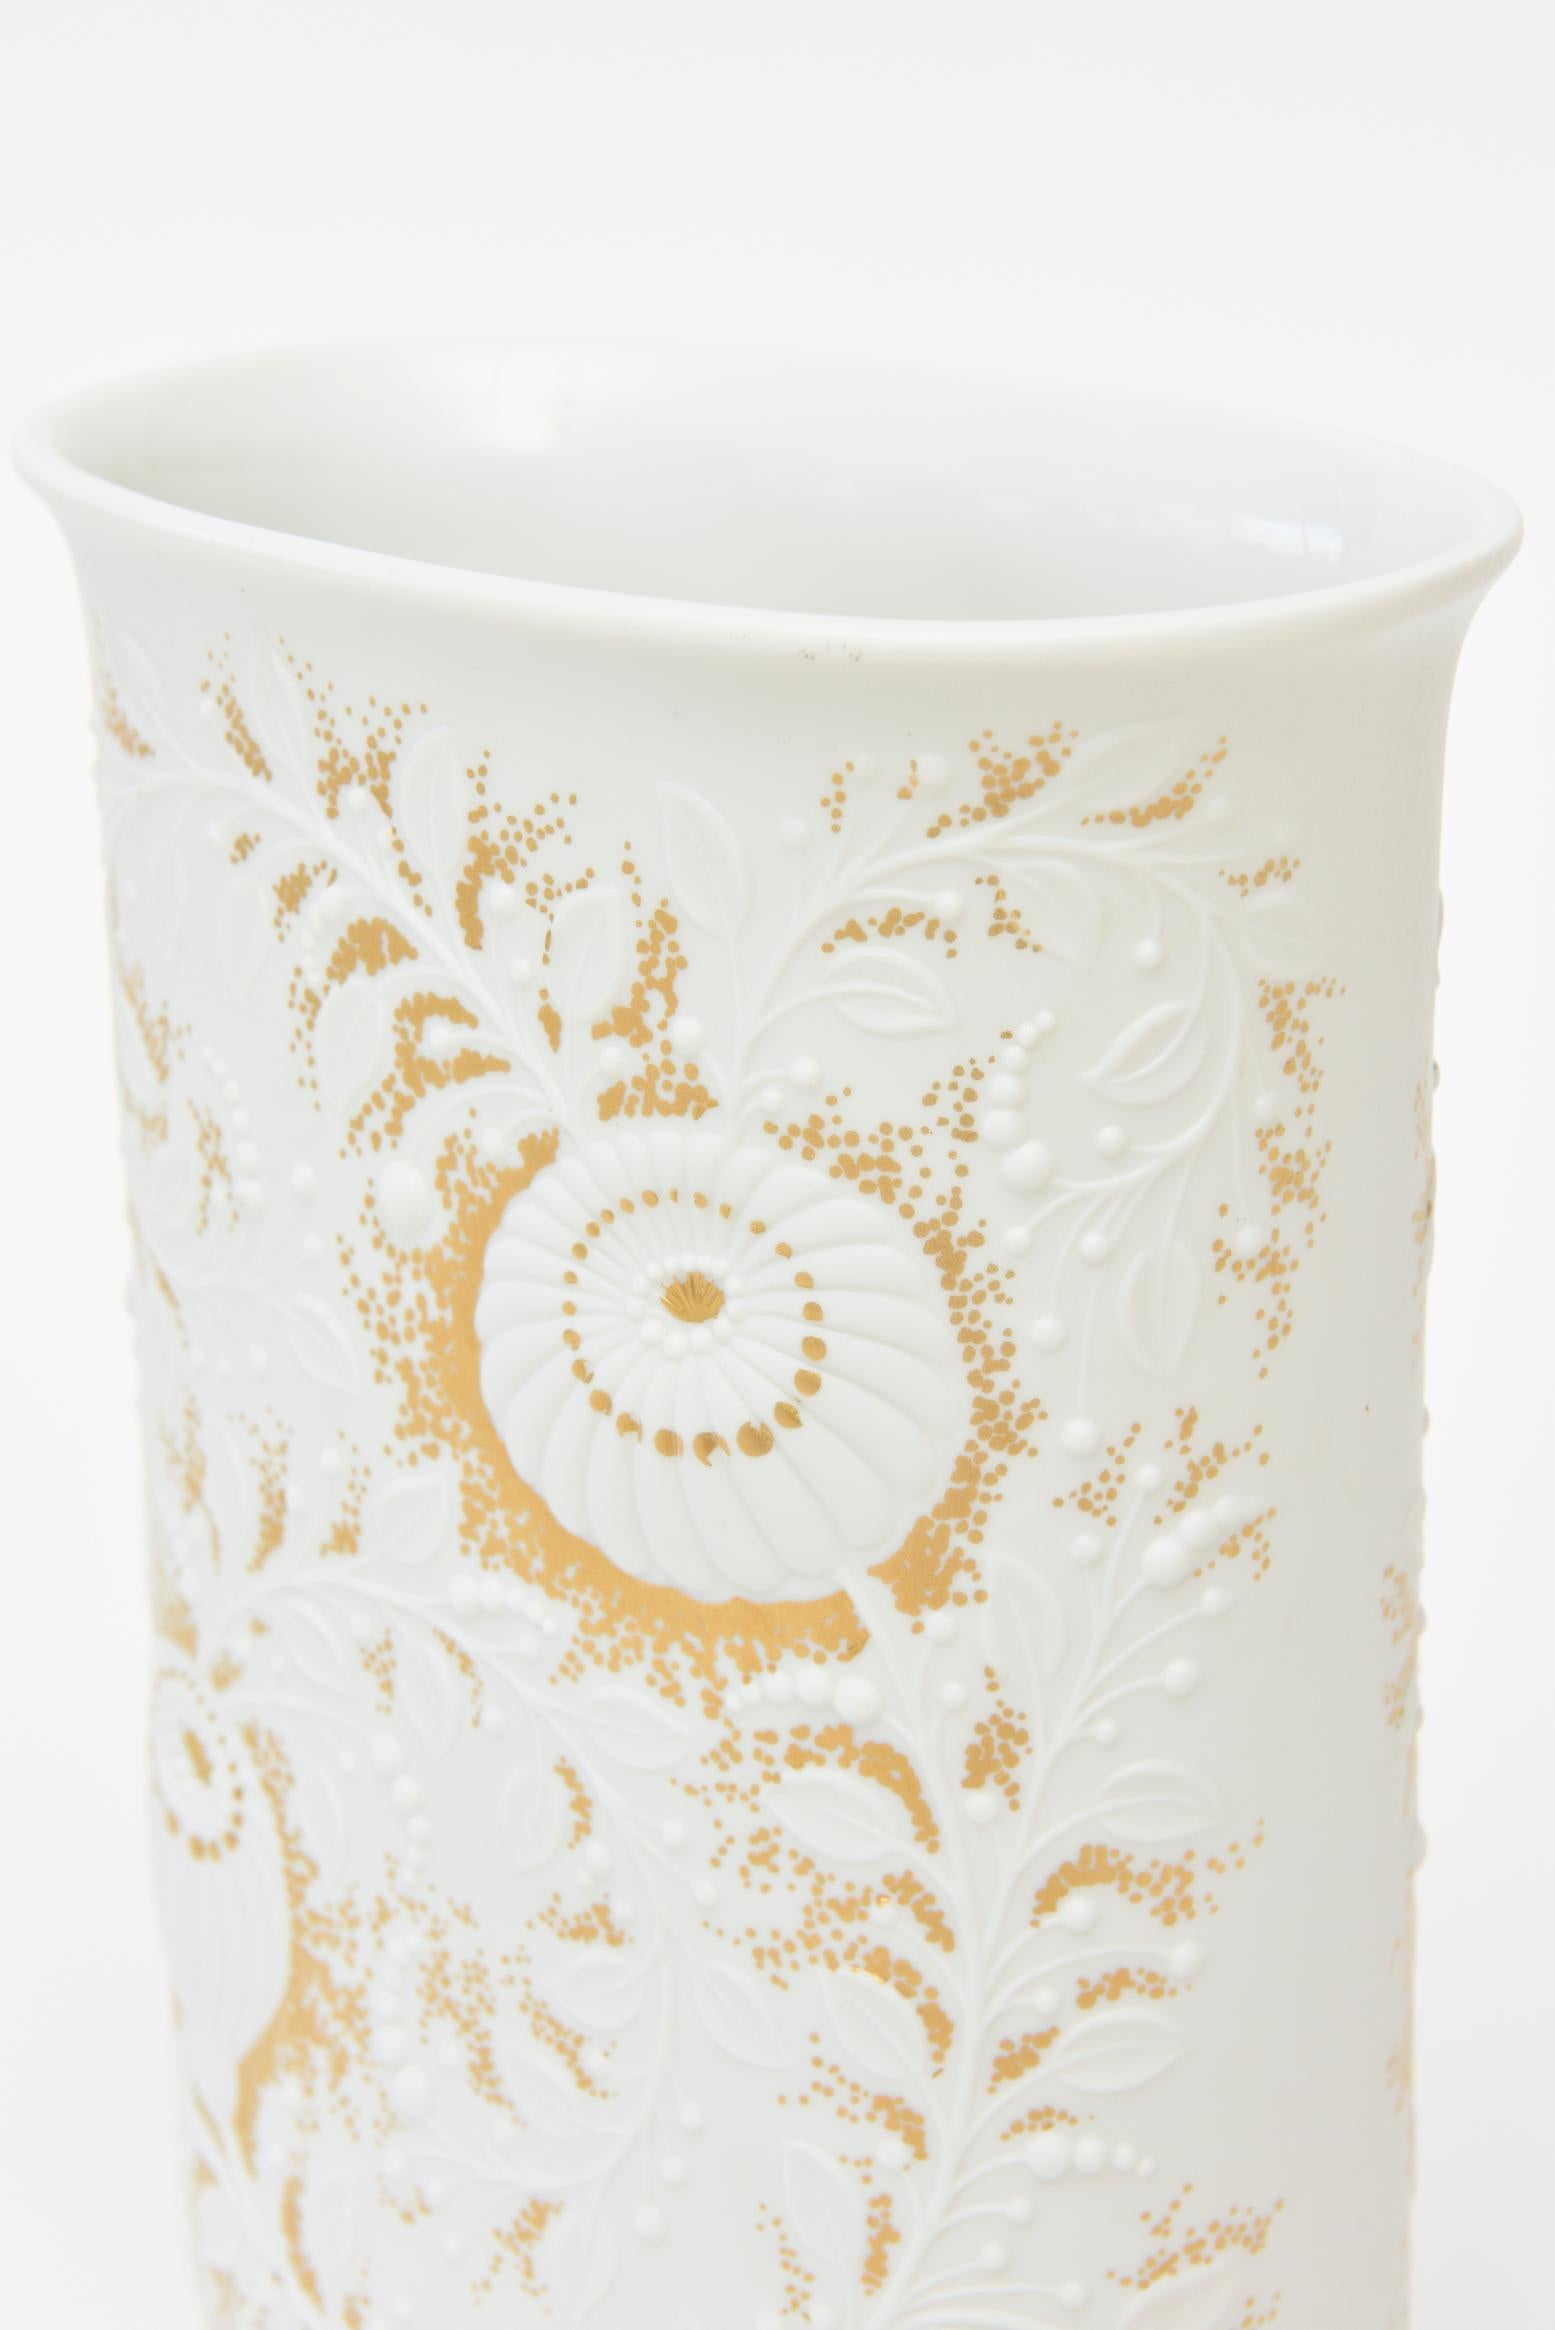 Or Kaiser Signed White and Gold Porcelain Vase With Textural Applied Flowers 60's en vente